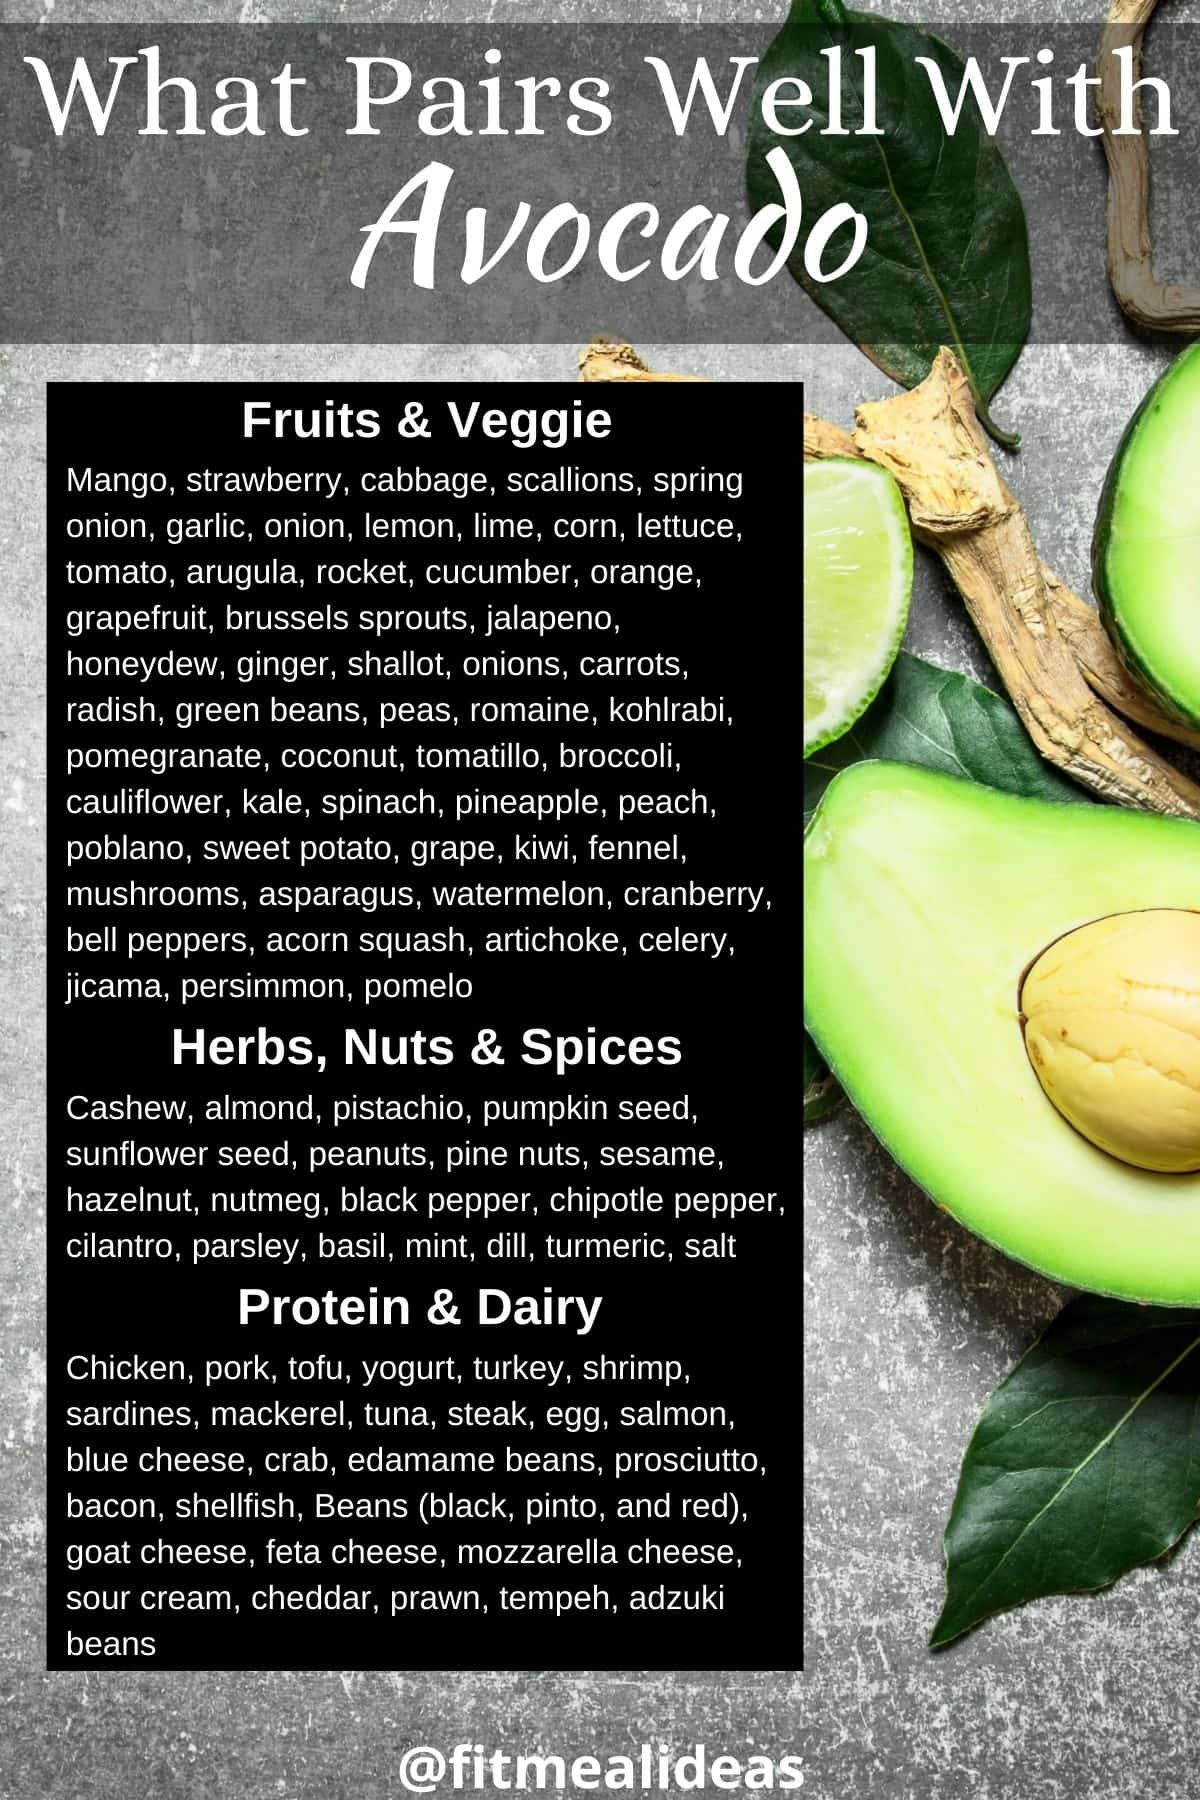 infographic that shows what foods pair well with avocado.